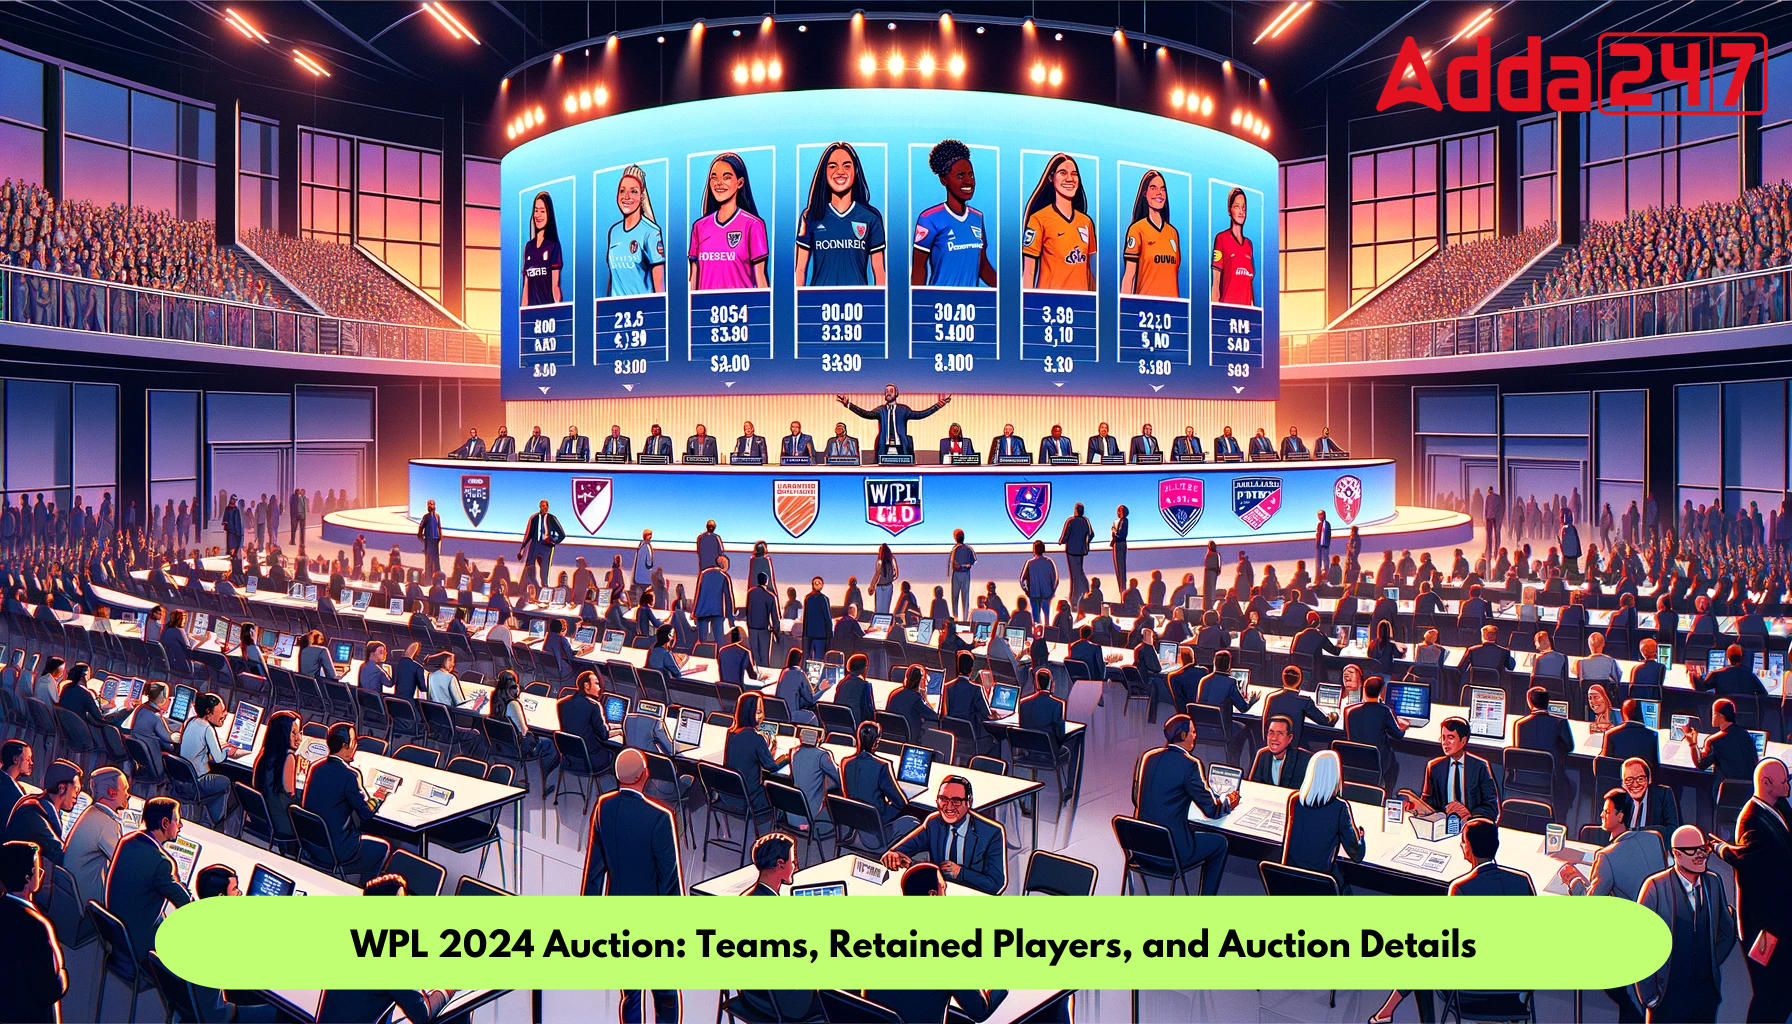 WPL 2024 Auction: Teams, Retained Players, and Auction Details